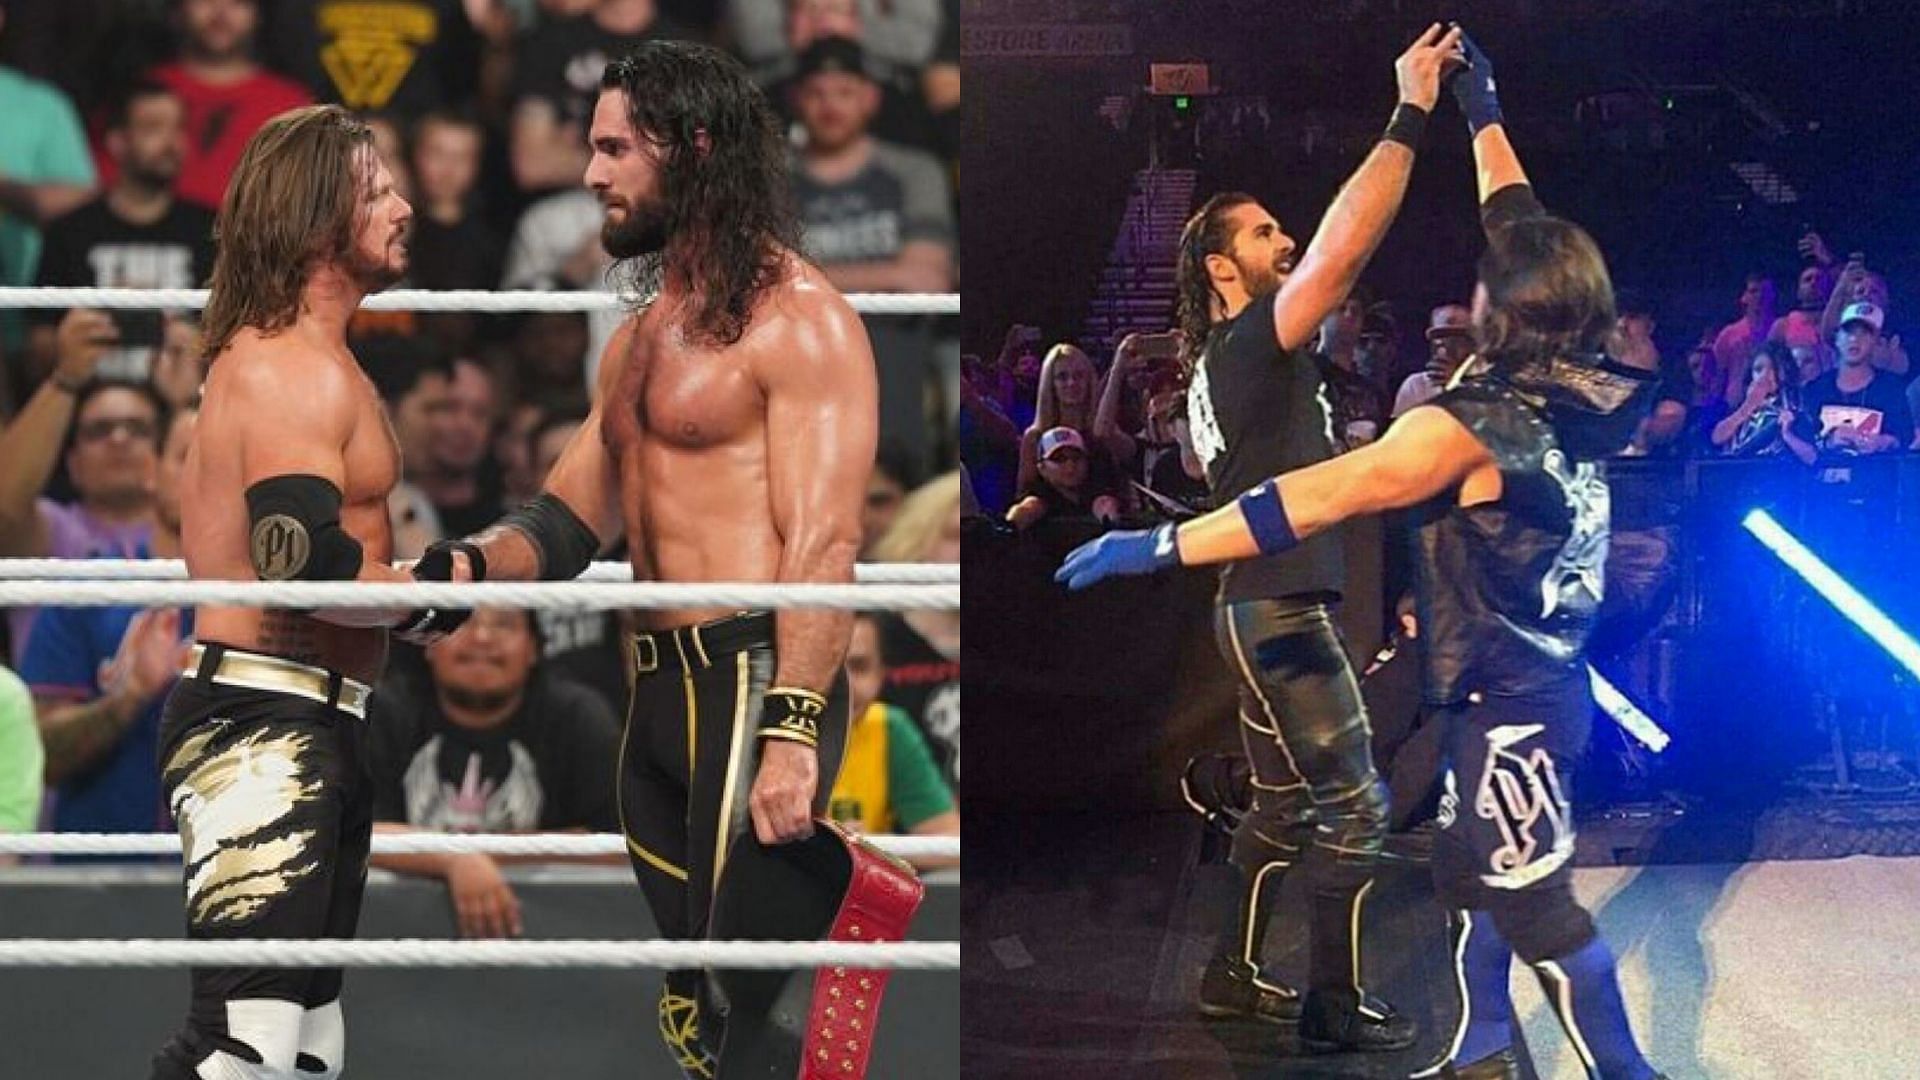 Seth Rollins and AJ Styles will collide at Night of Champions